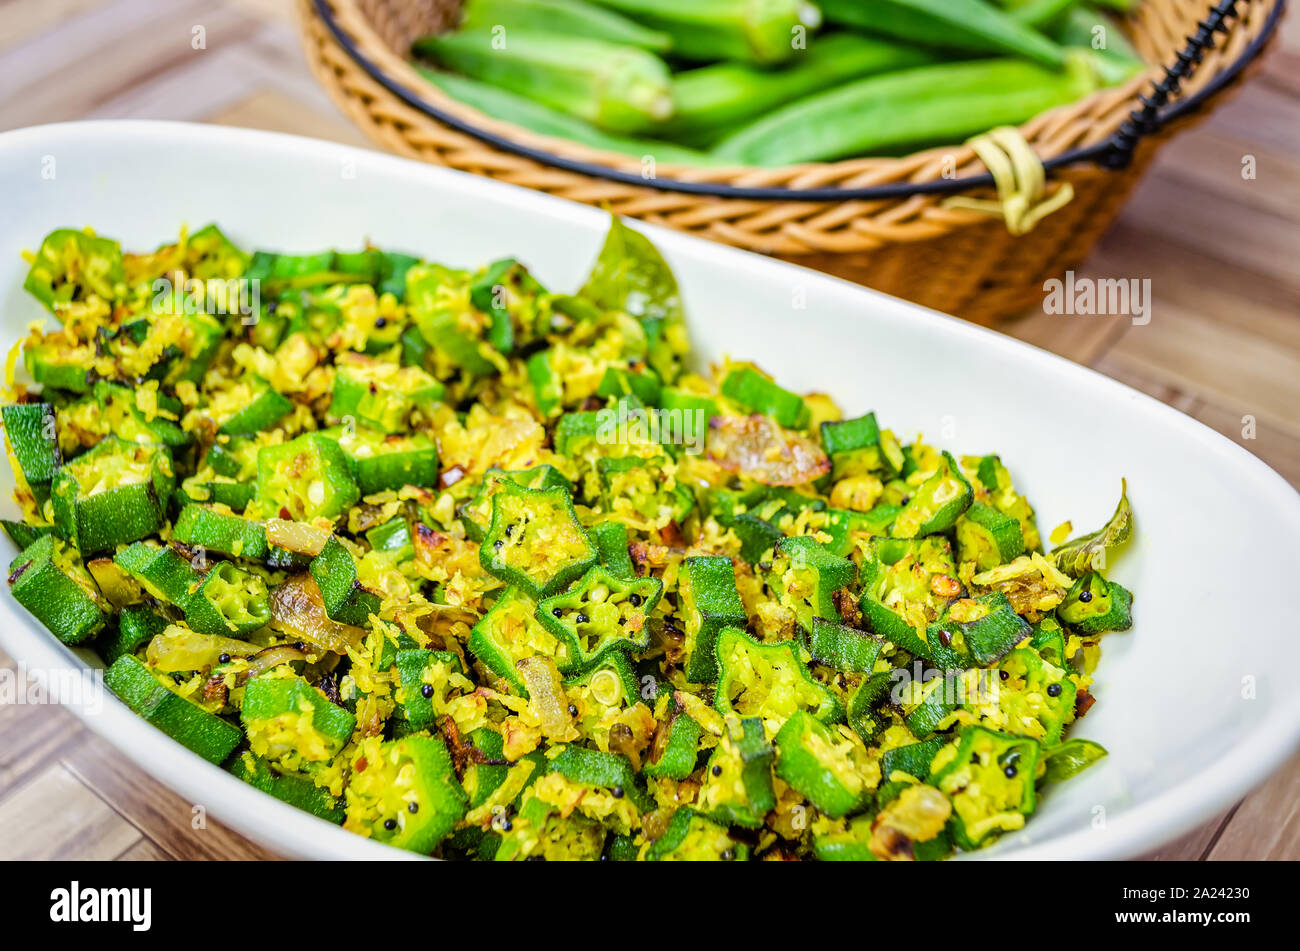 Closeup of Okra Stir Fry with grated coconut in an oval bowl with fresh Lady's fingers in a basket in the background Stock Photo